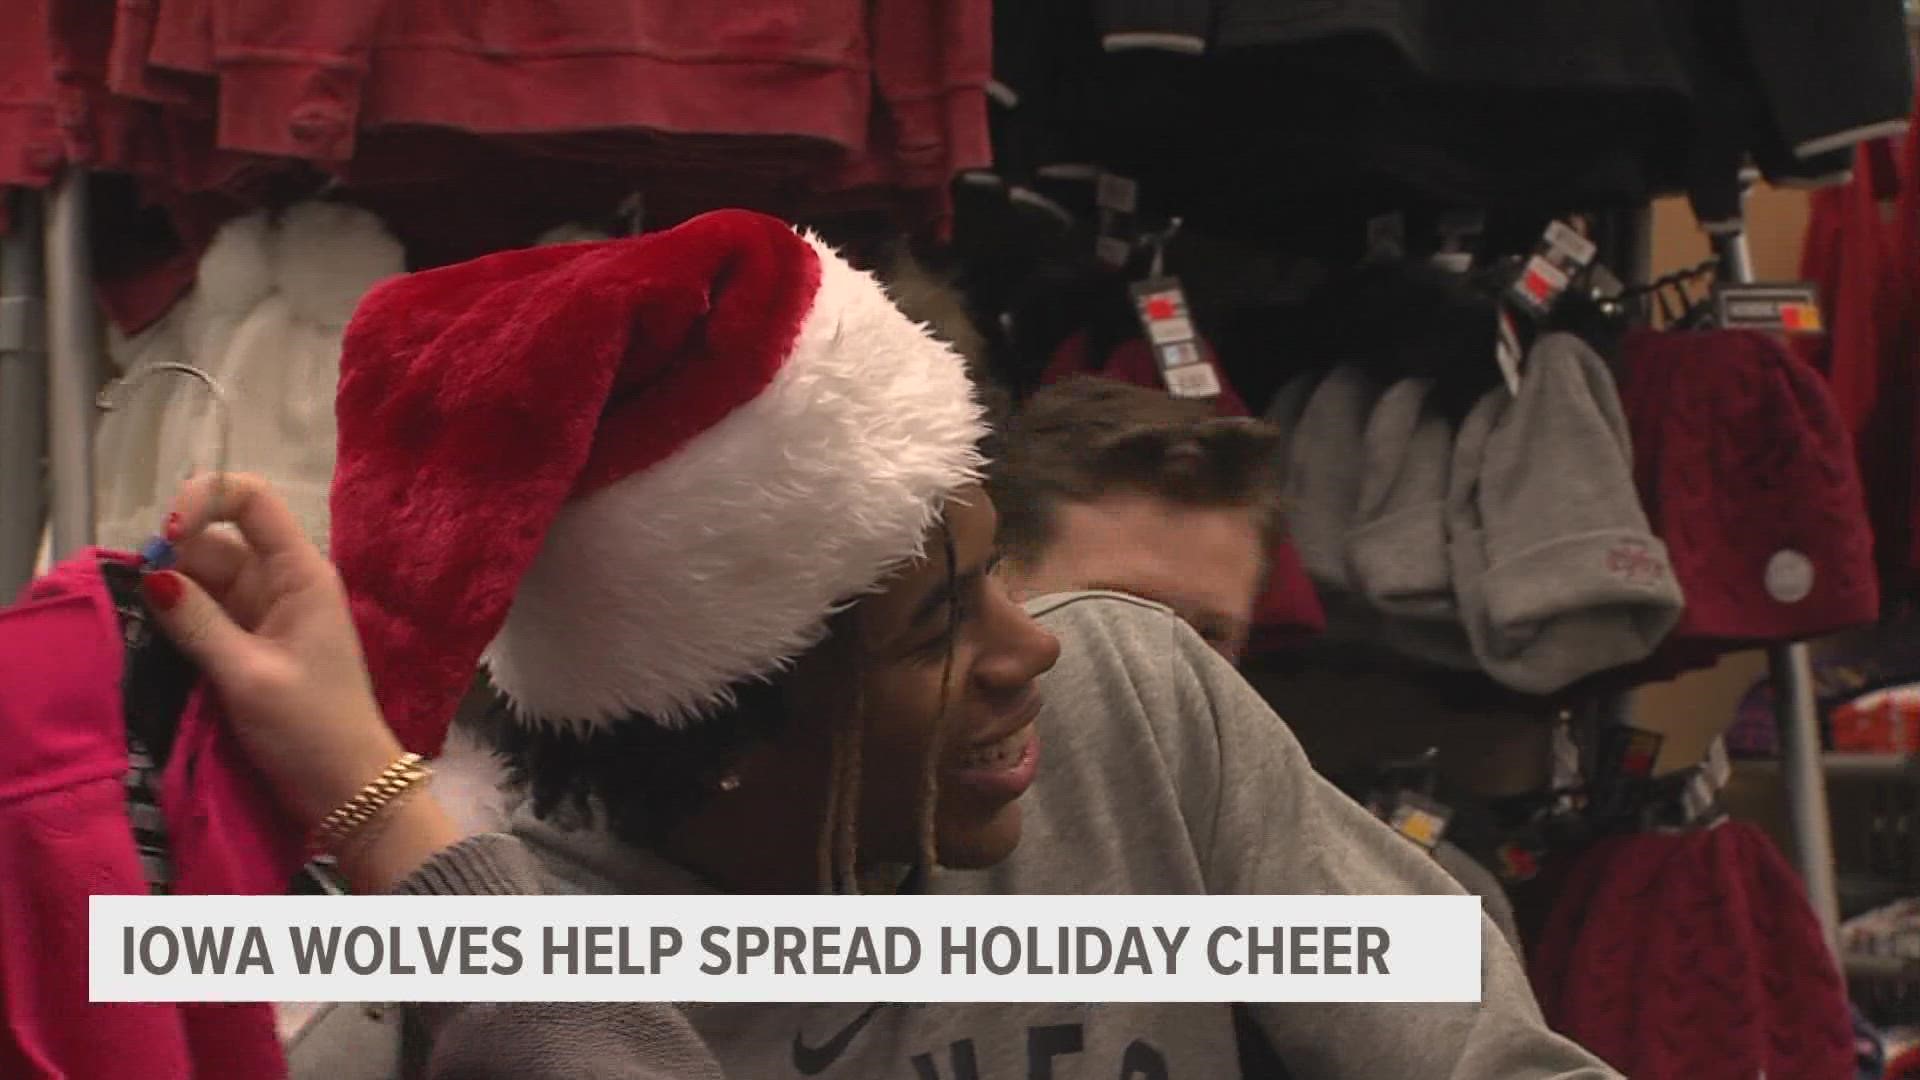 The Iowa Wolves are spreading holiday cheer by giving back to kids in the community.